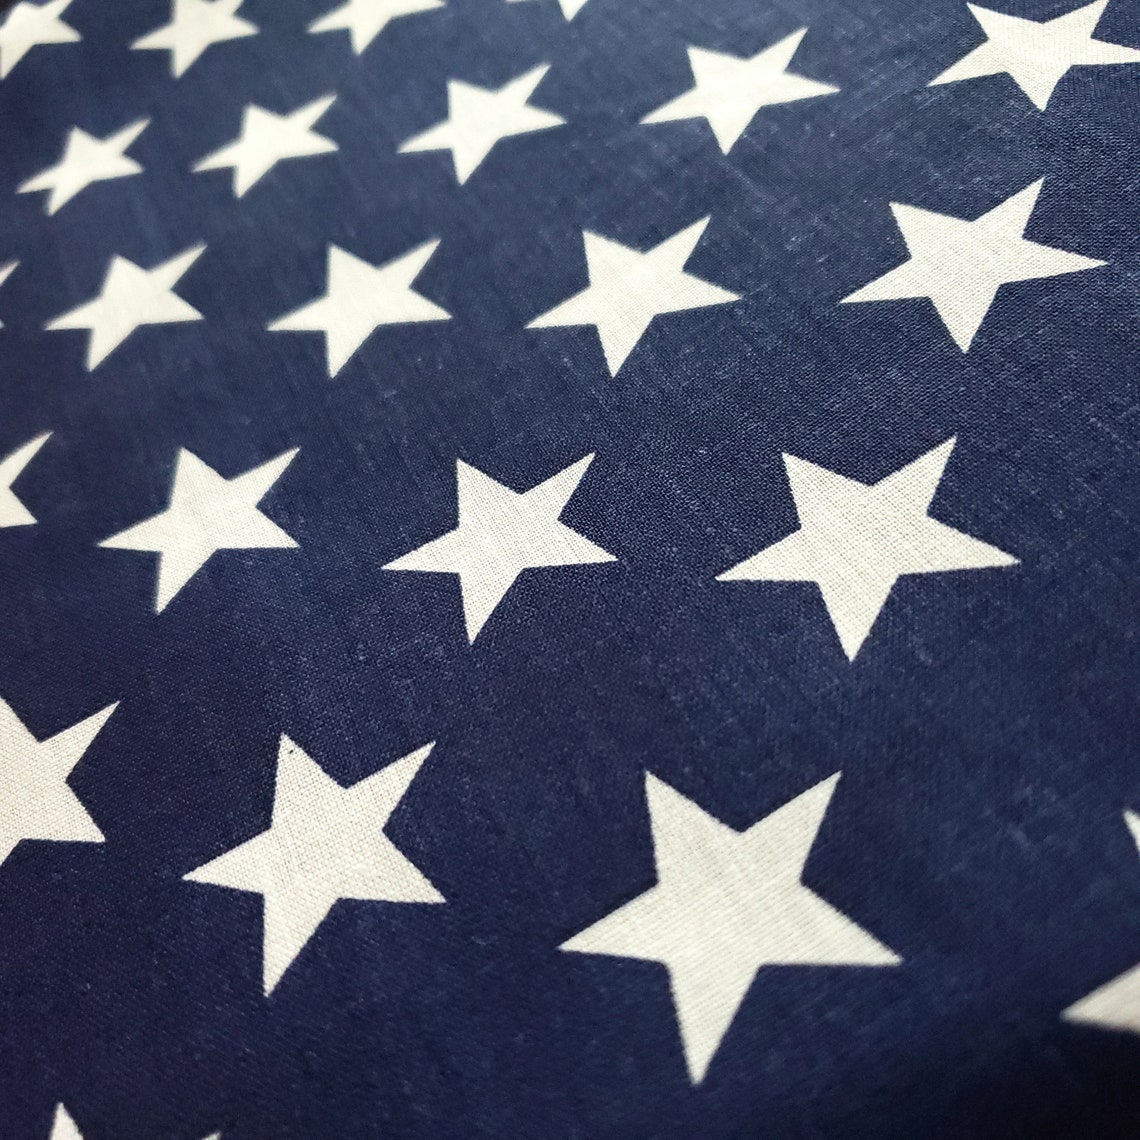 Navy Blue Star Print Poly Cotton Fabric 58 By The Yard | Etsy